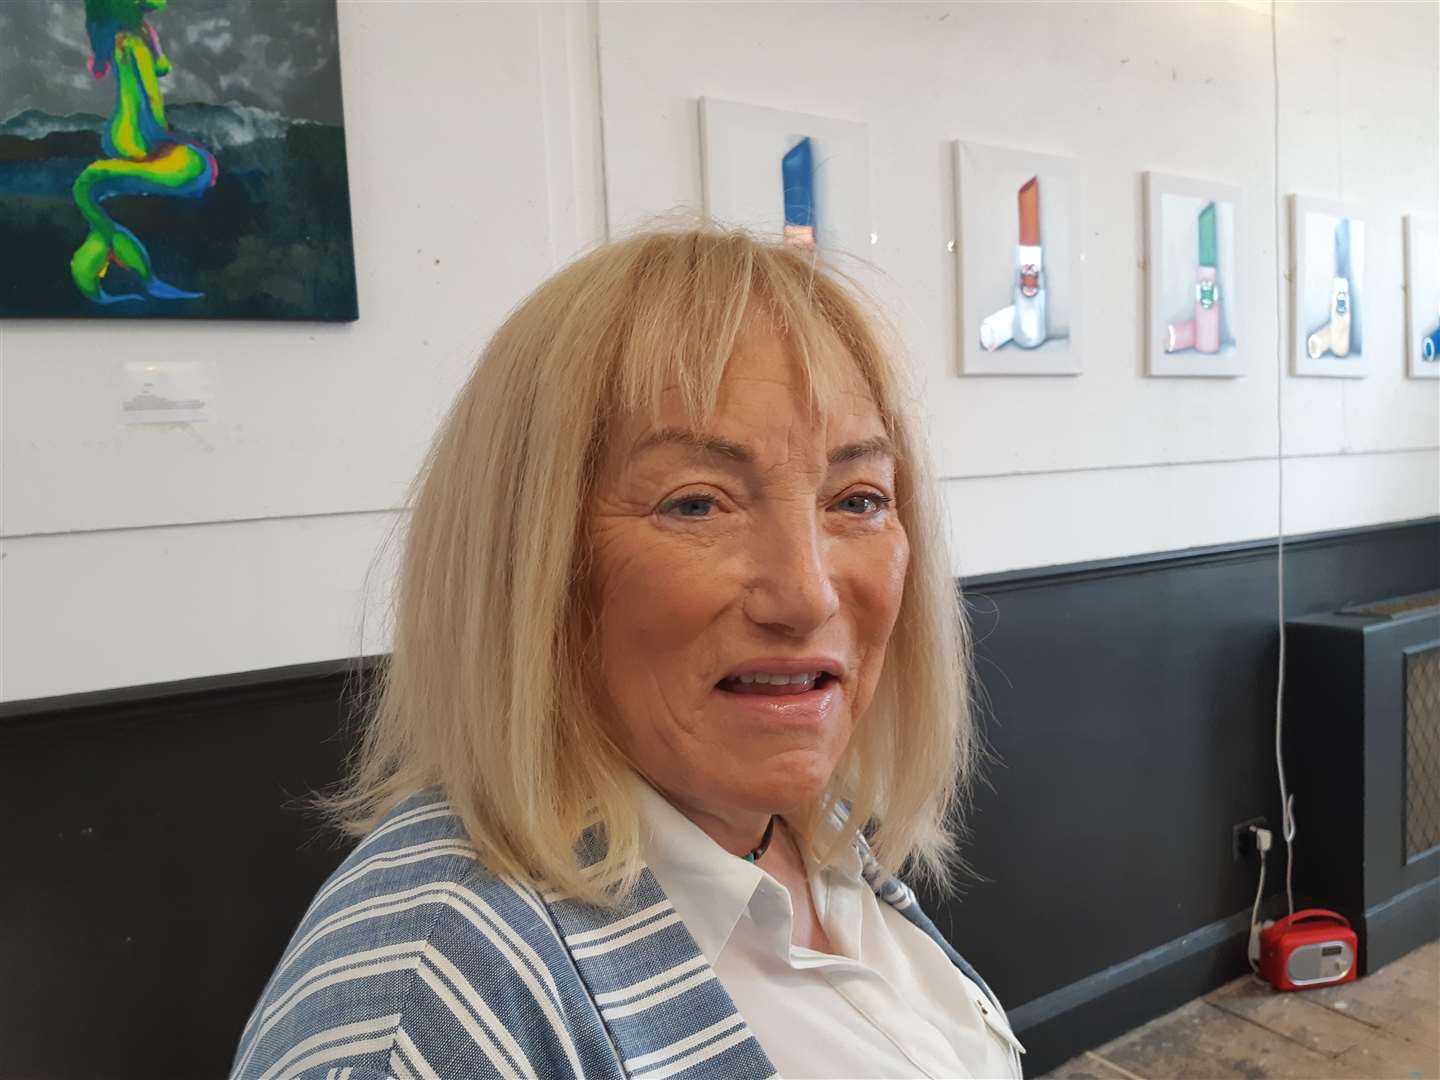 Kellie Maloney: "Suppressing my gender made me angry."